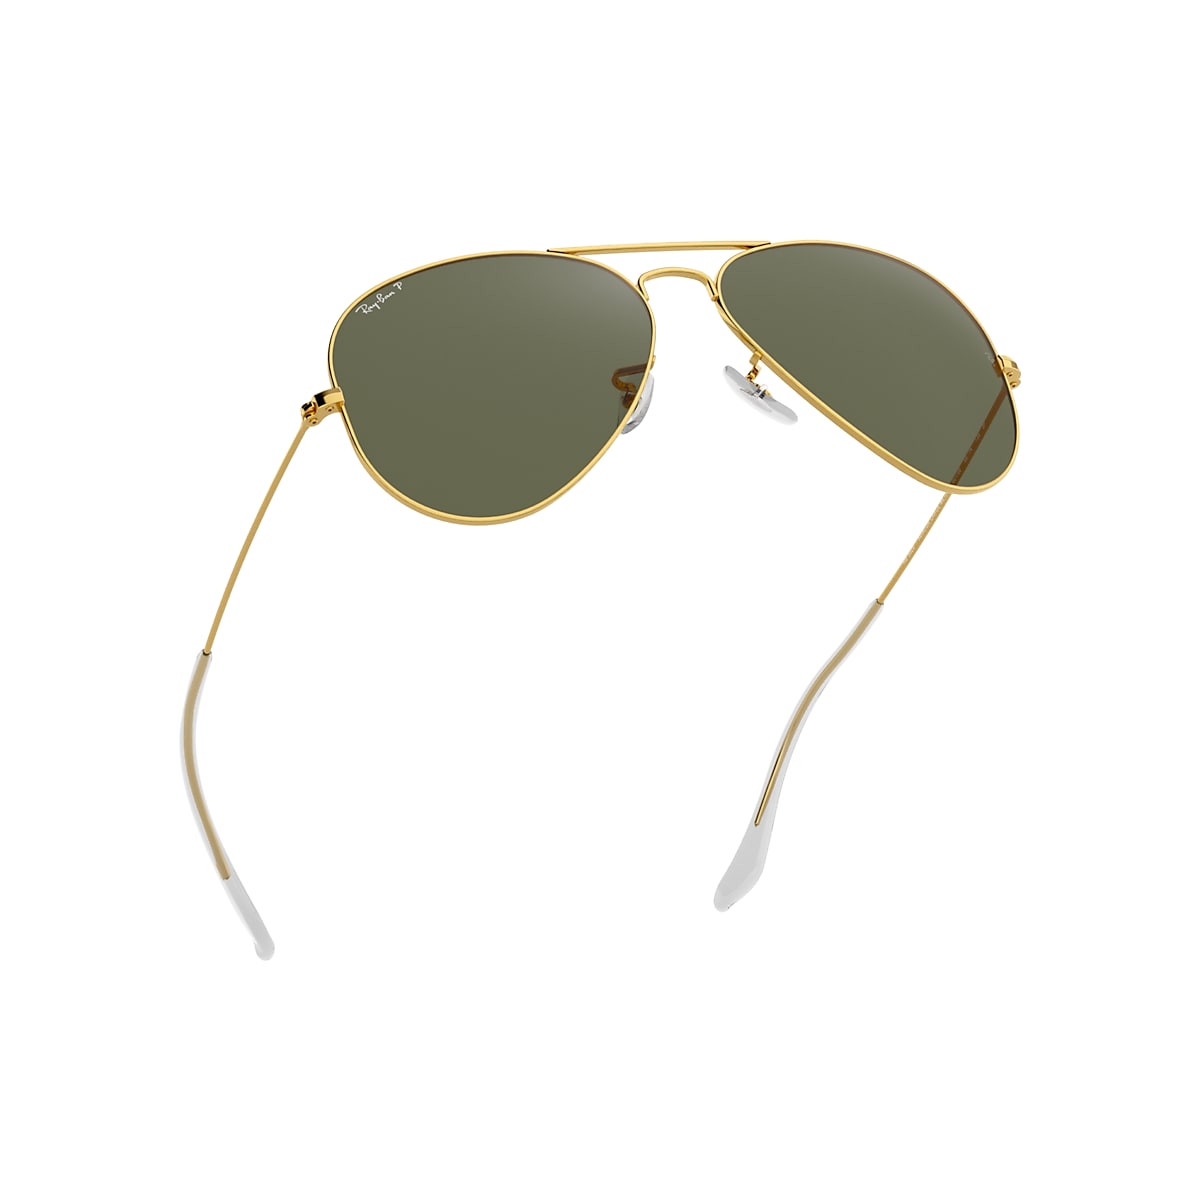 AVIATOR Sunglasses in and Green - RB3025 | Ray-Ban® US